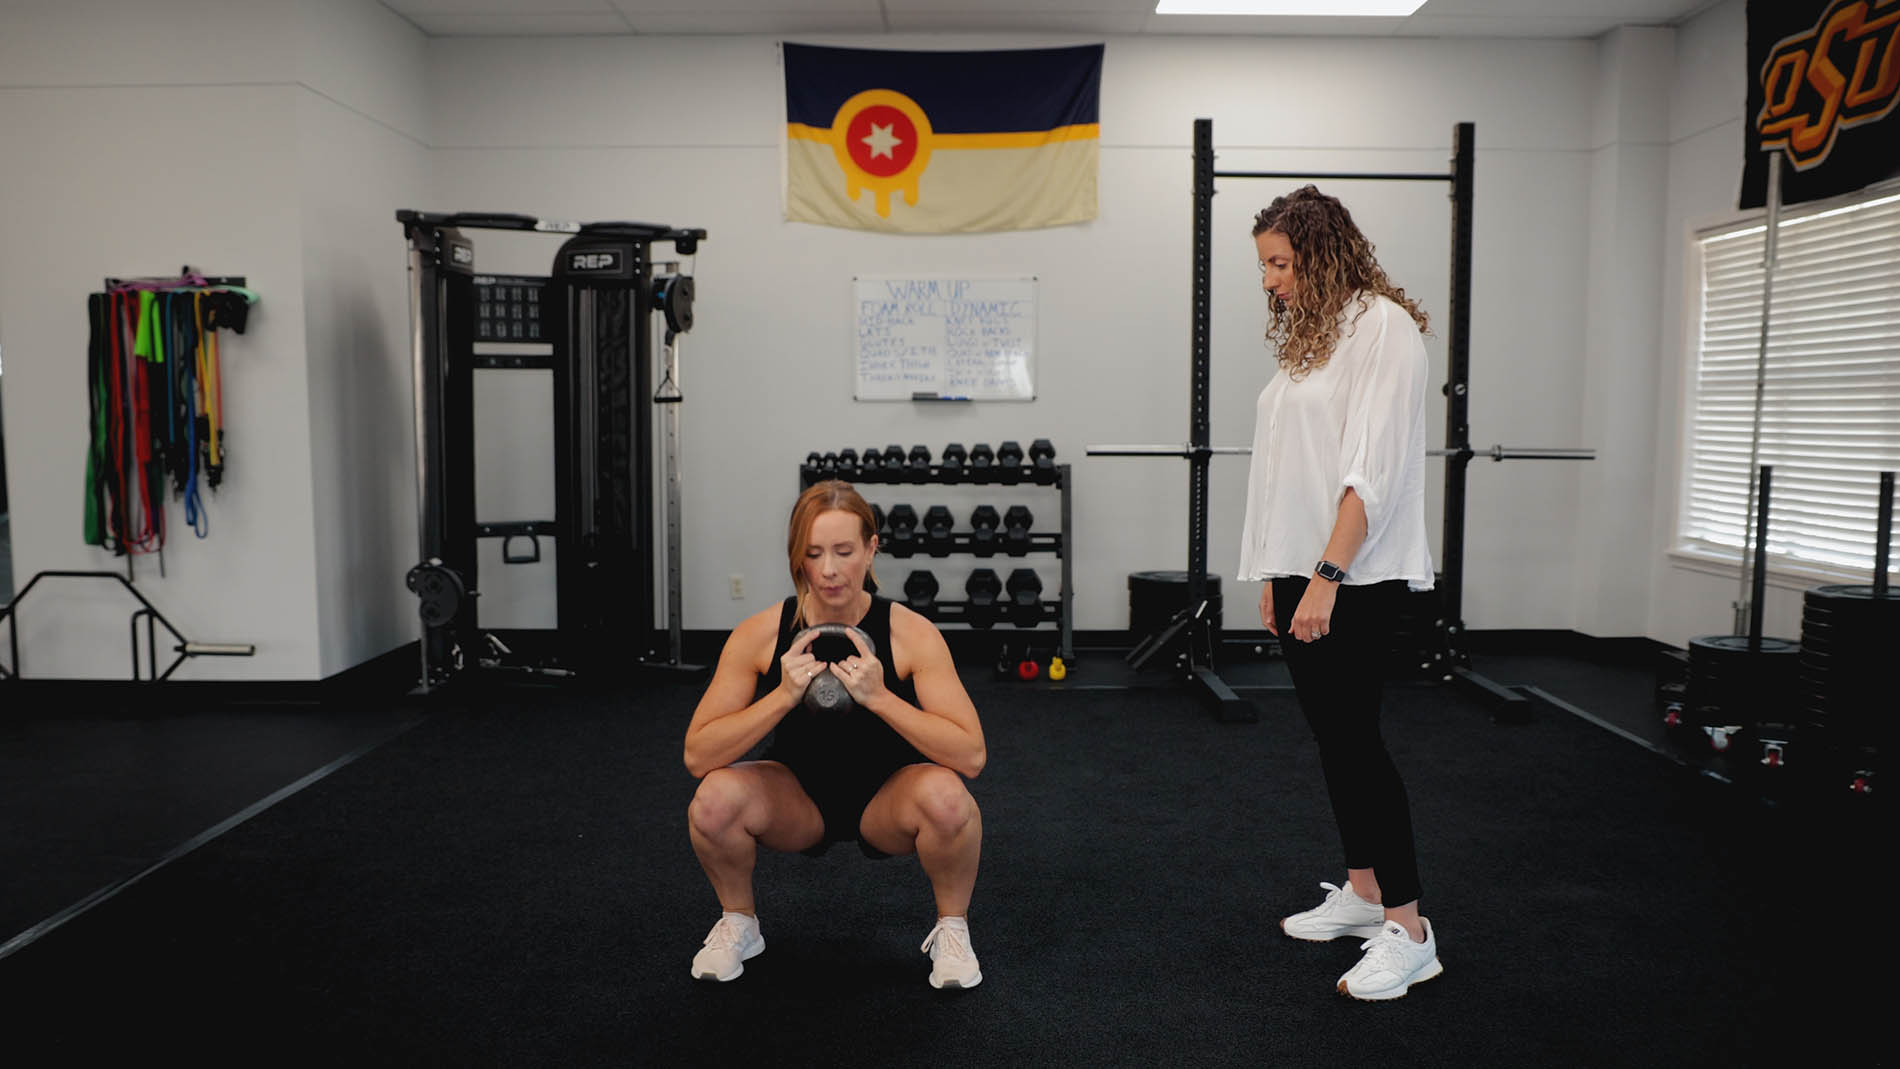 Two women, one squatting with a medicine ball and the other standing and observing, in a gym with fitness equipment and a pelvic health flag on the wall.